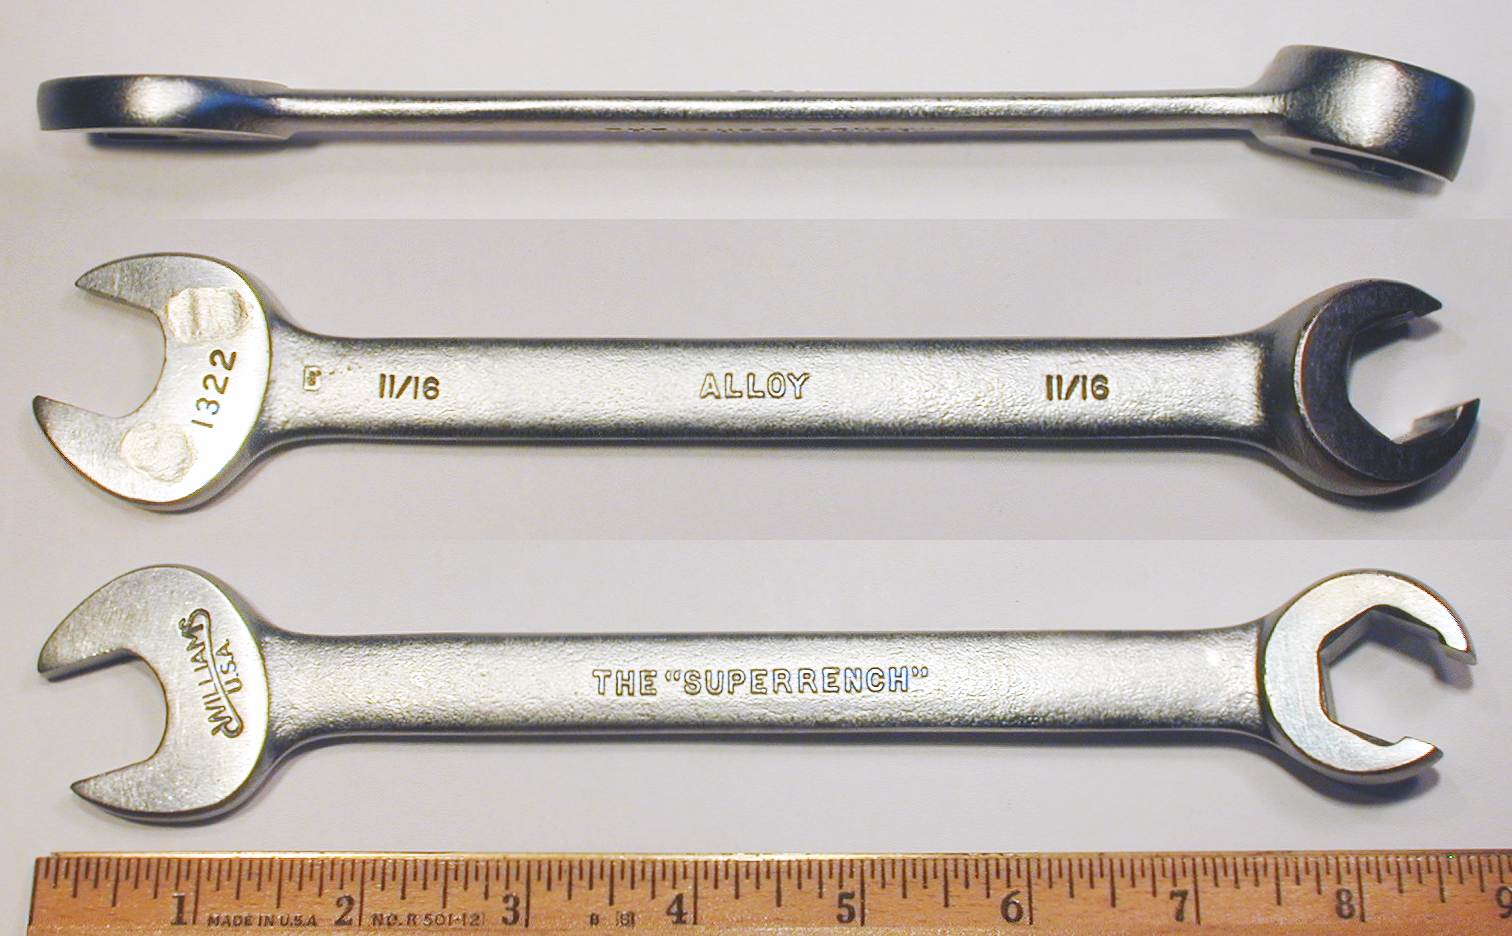 Details about   NOS Williams 1324 Superrench 3/4" Flare Nut Line Wrench Dble Open-End WR.14c.H7b 